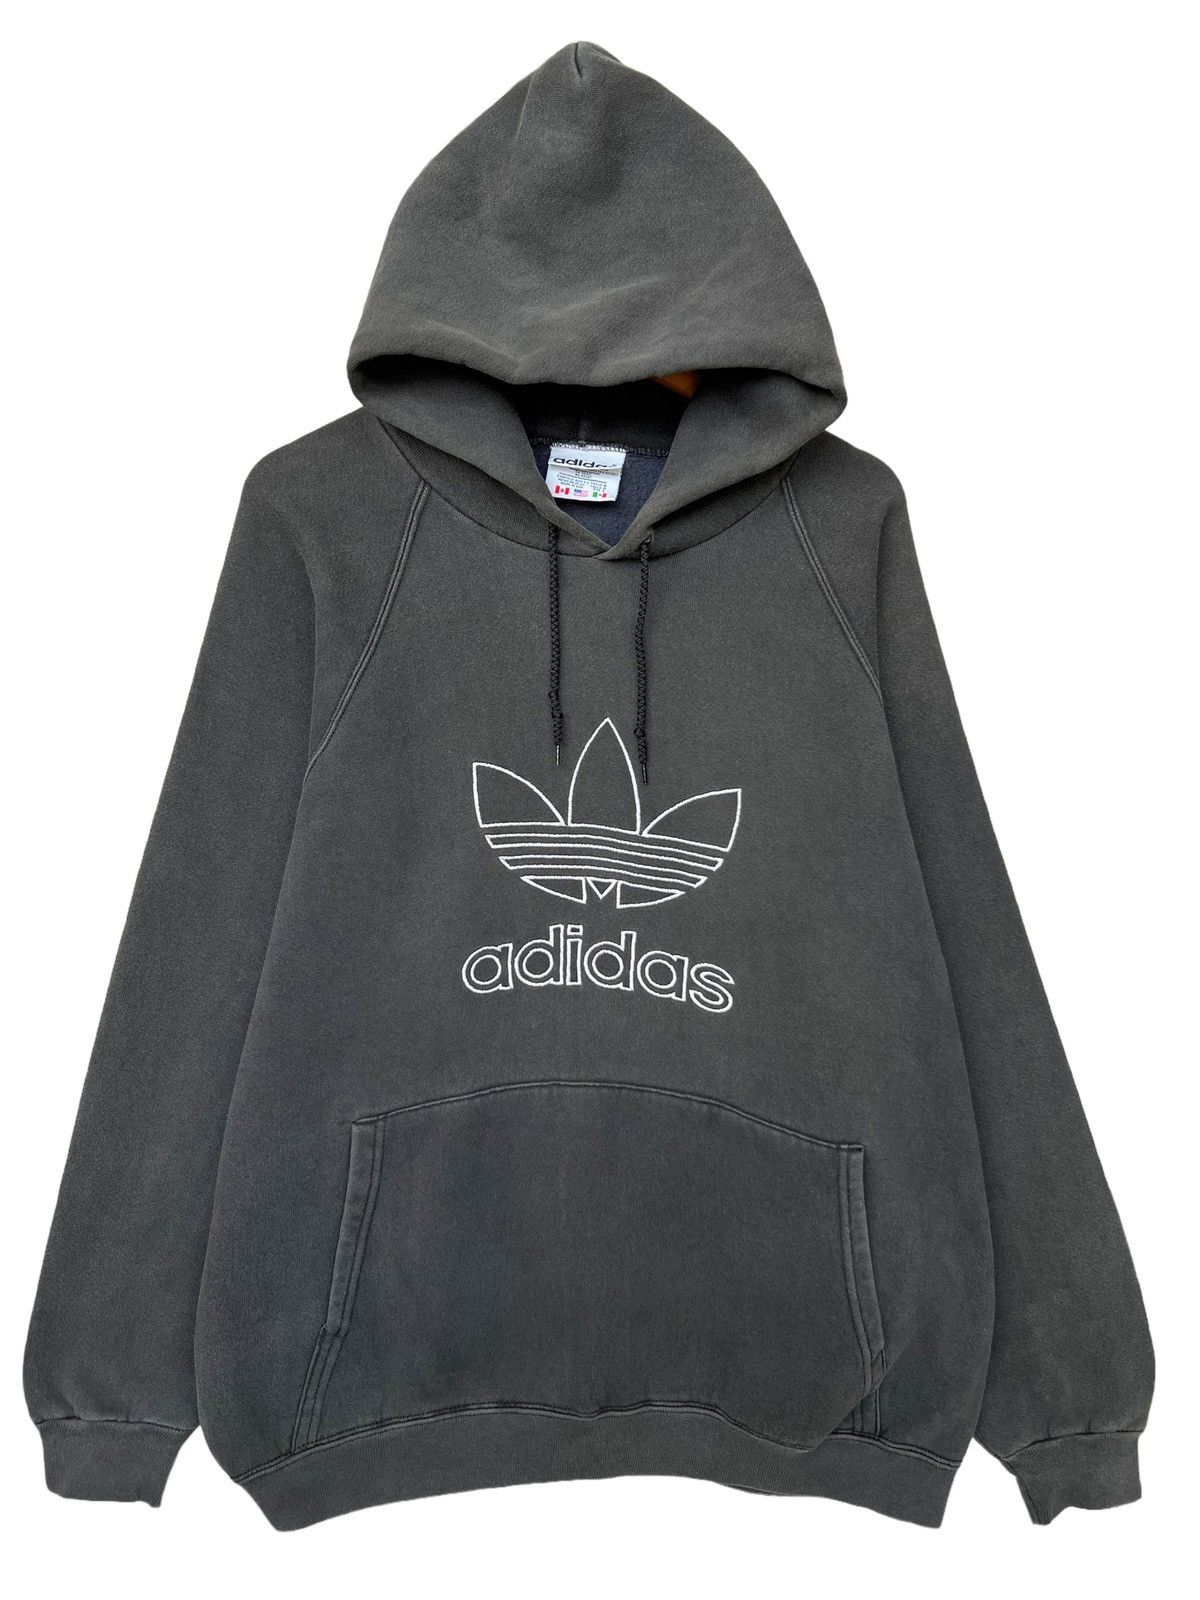 Vintage 90s Adidas Sunfaded Baggy Boxy Sunfaded Hoodie - 3